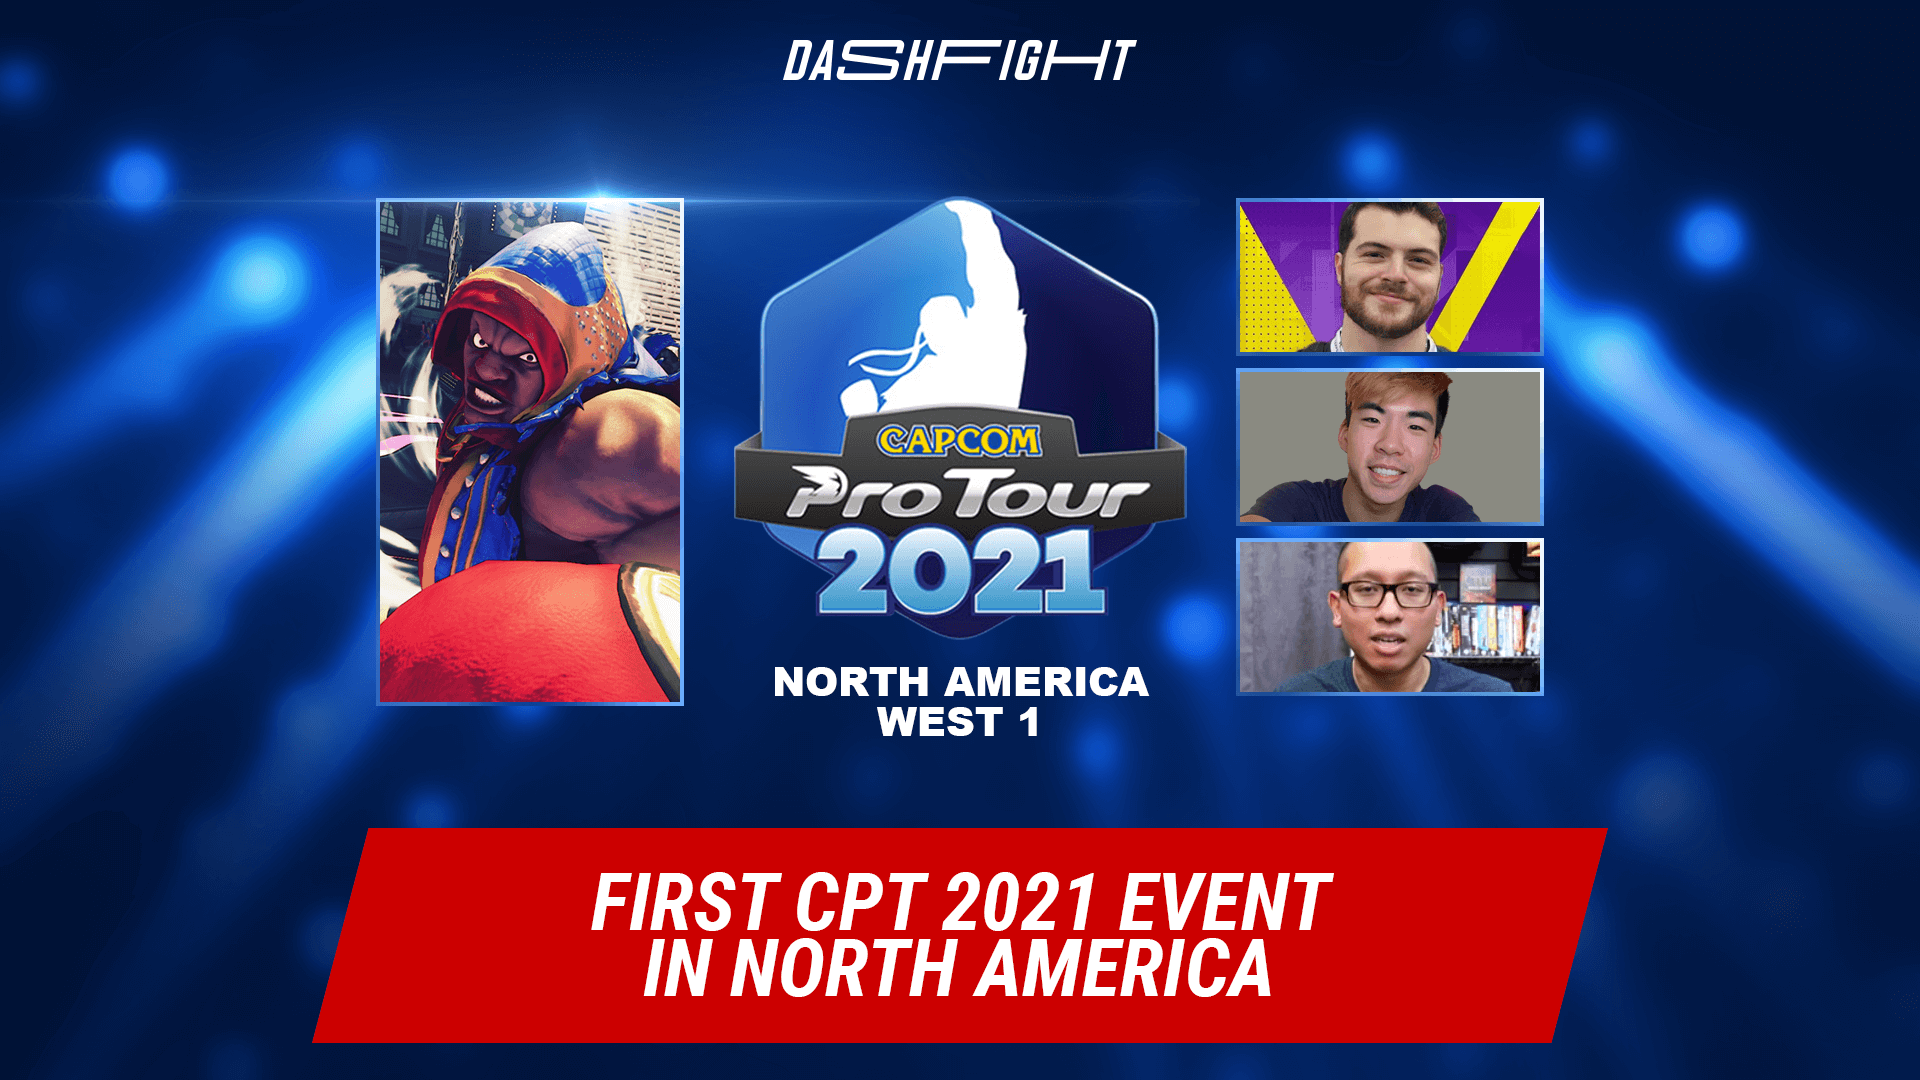 First CPT 2021 Event in North America